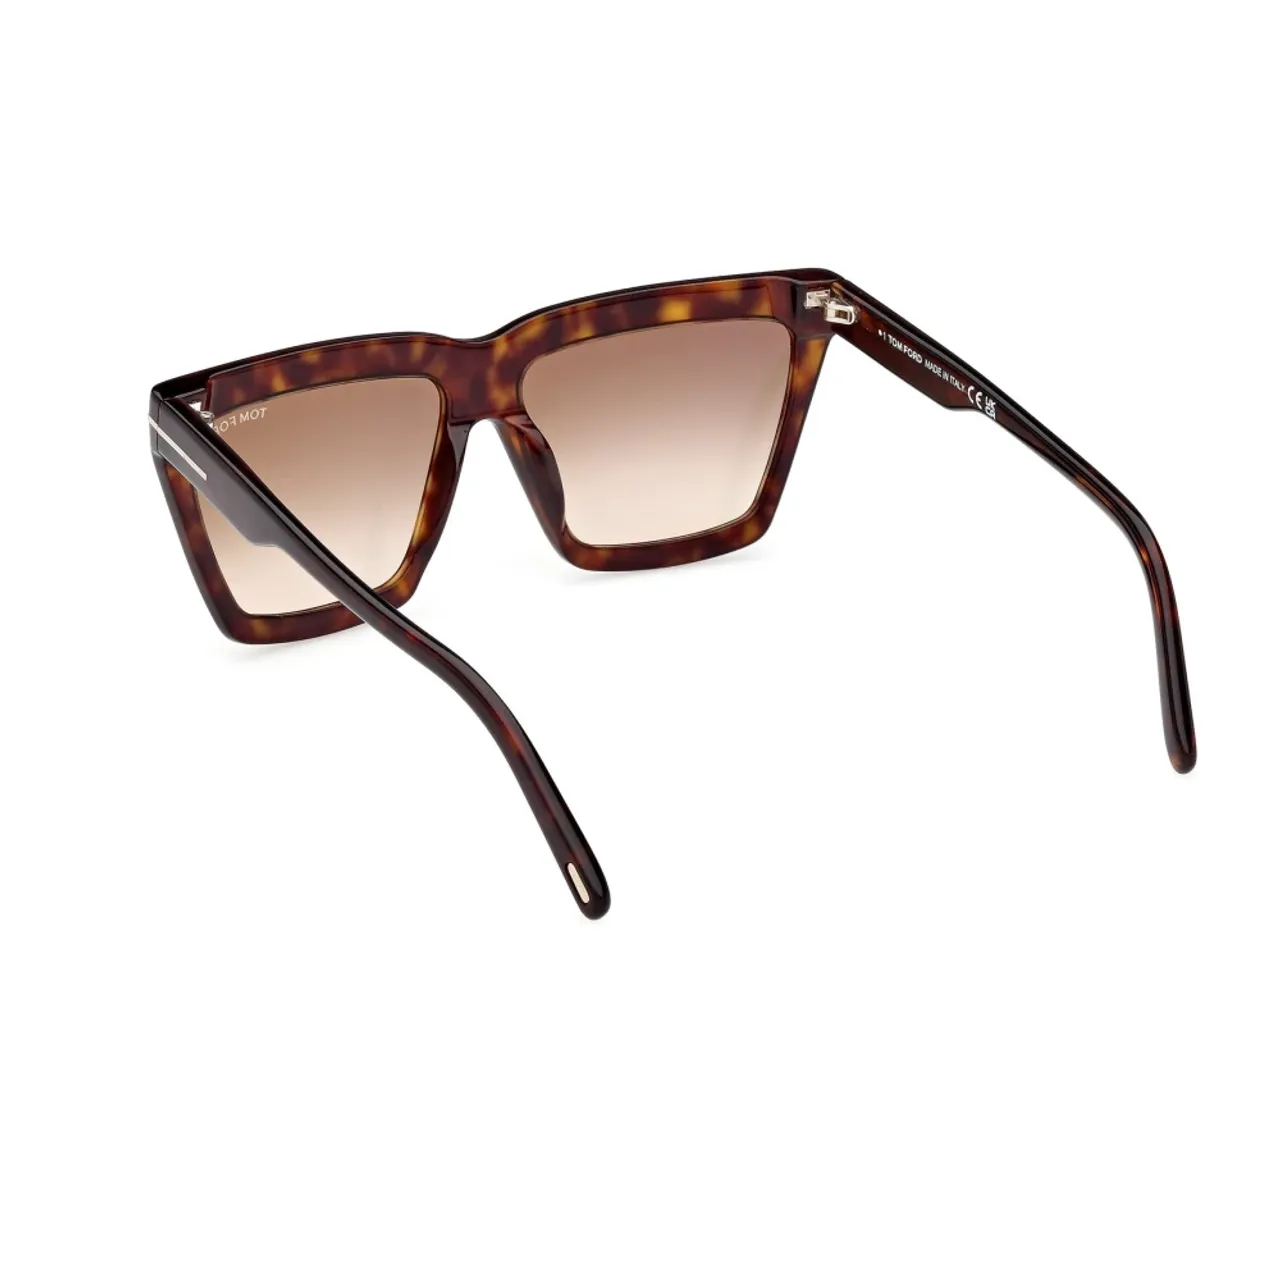 Tom Ford , Womens Butterfly Sunglasses Havana Glossy ,Brown female, Sizes: